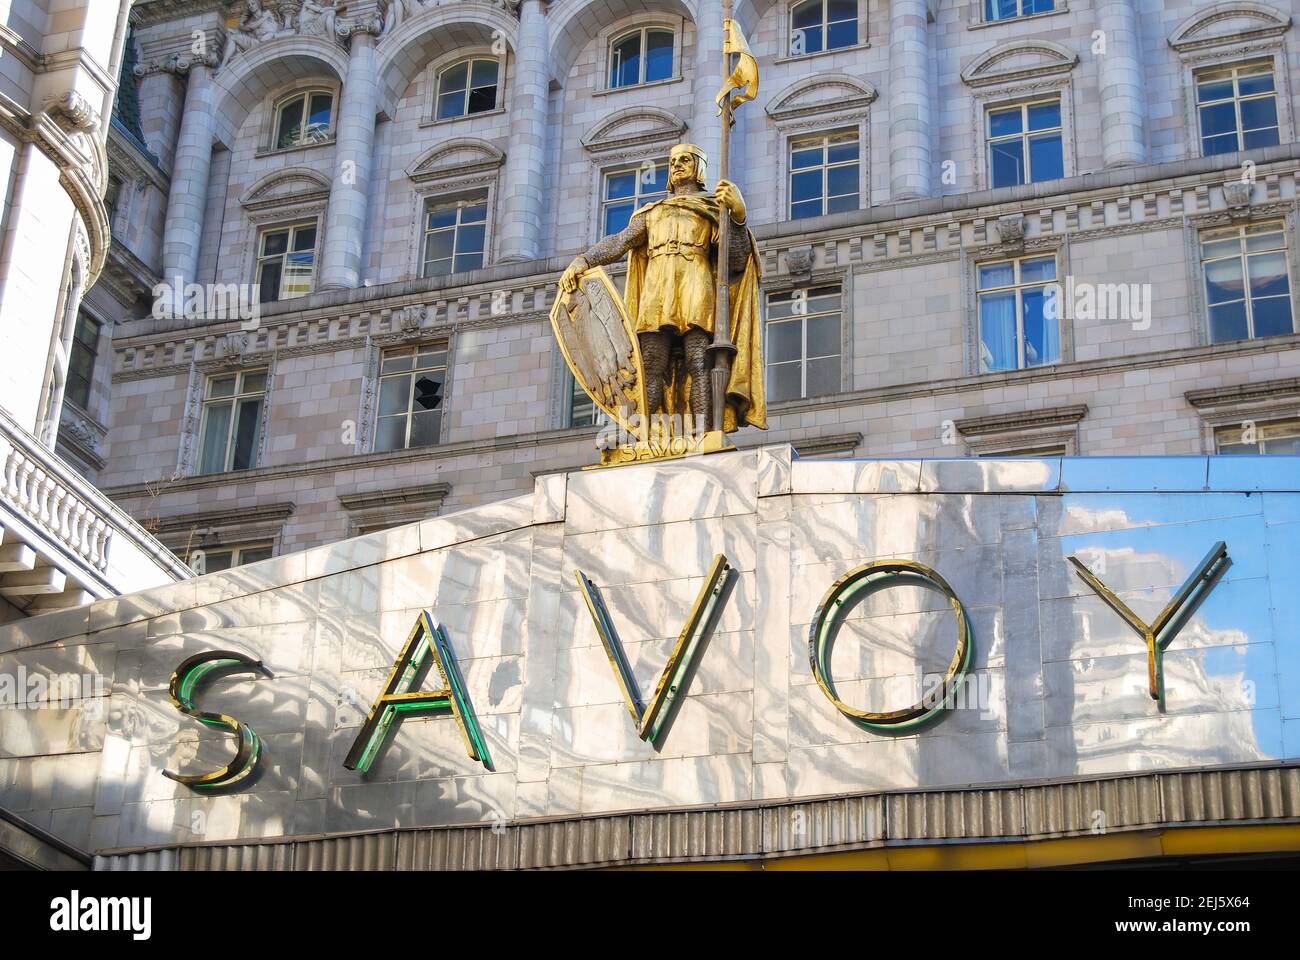 Savoy Hotel entrance sign, The Strand, City of Westminster, Greater London, England, United Kingdom Stock Photo